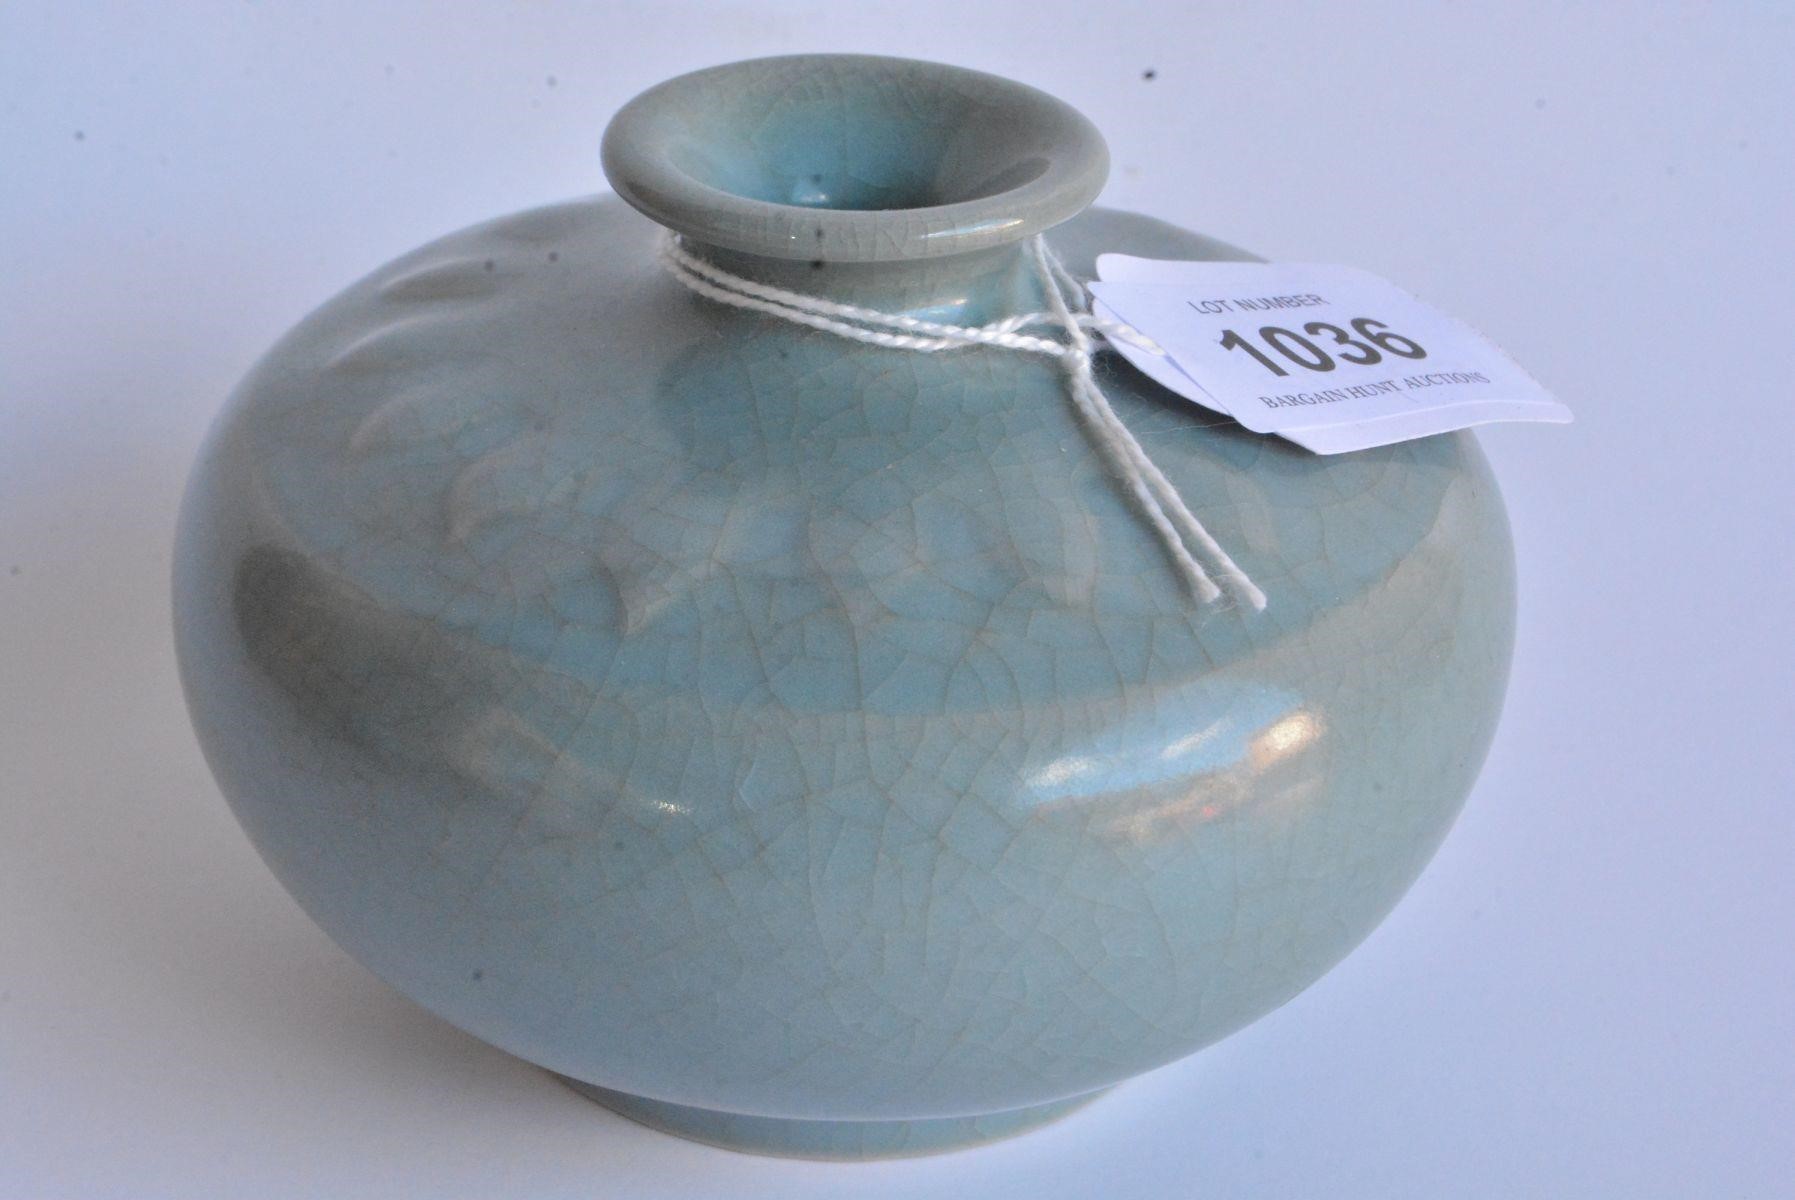 Chinese Treasures Online Only Auction - Finishes Aug 19th